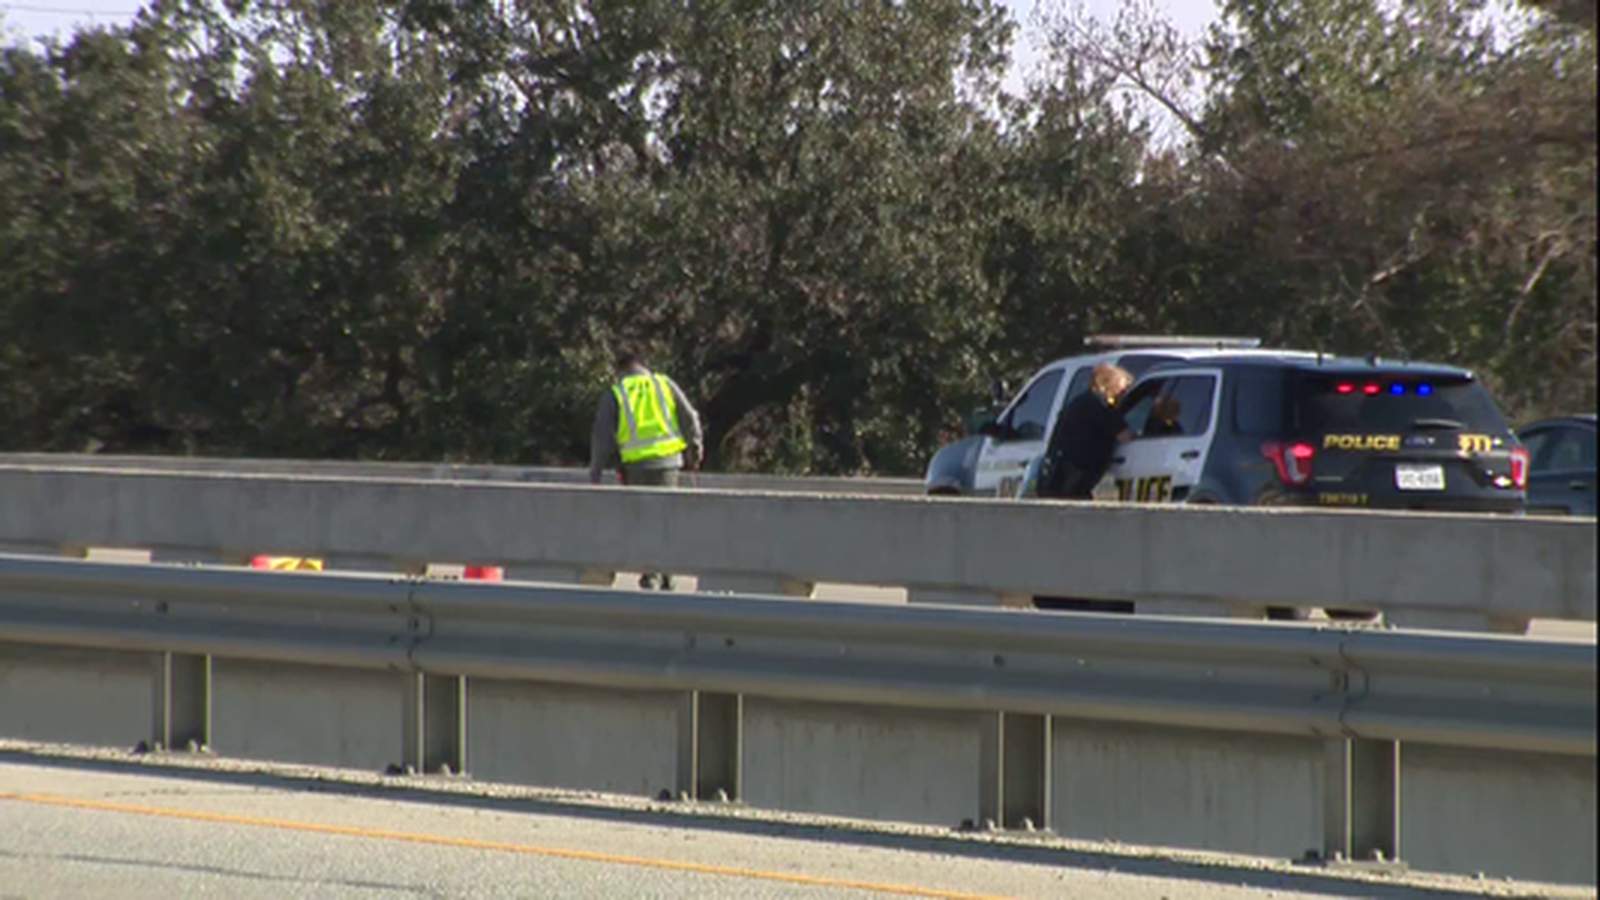 VIDEO: I-35 lanes shut down in SW SA after pedestrian fatality - clipped version